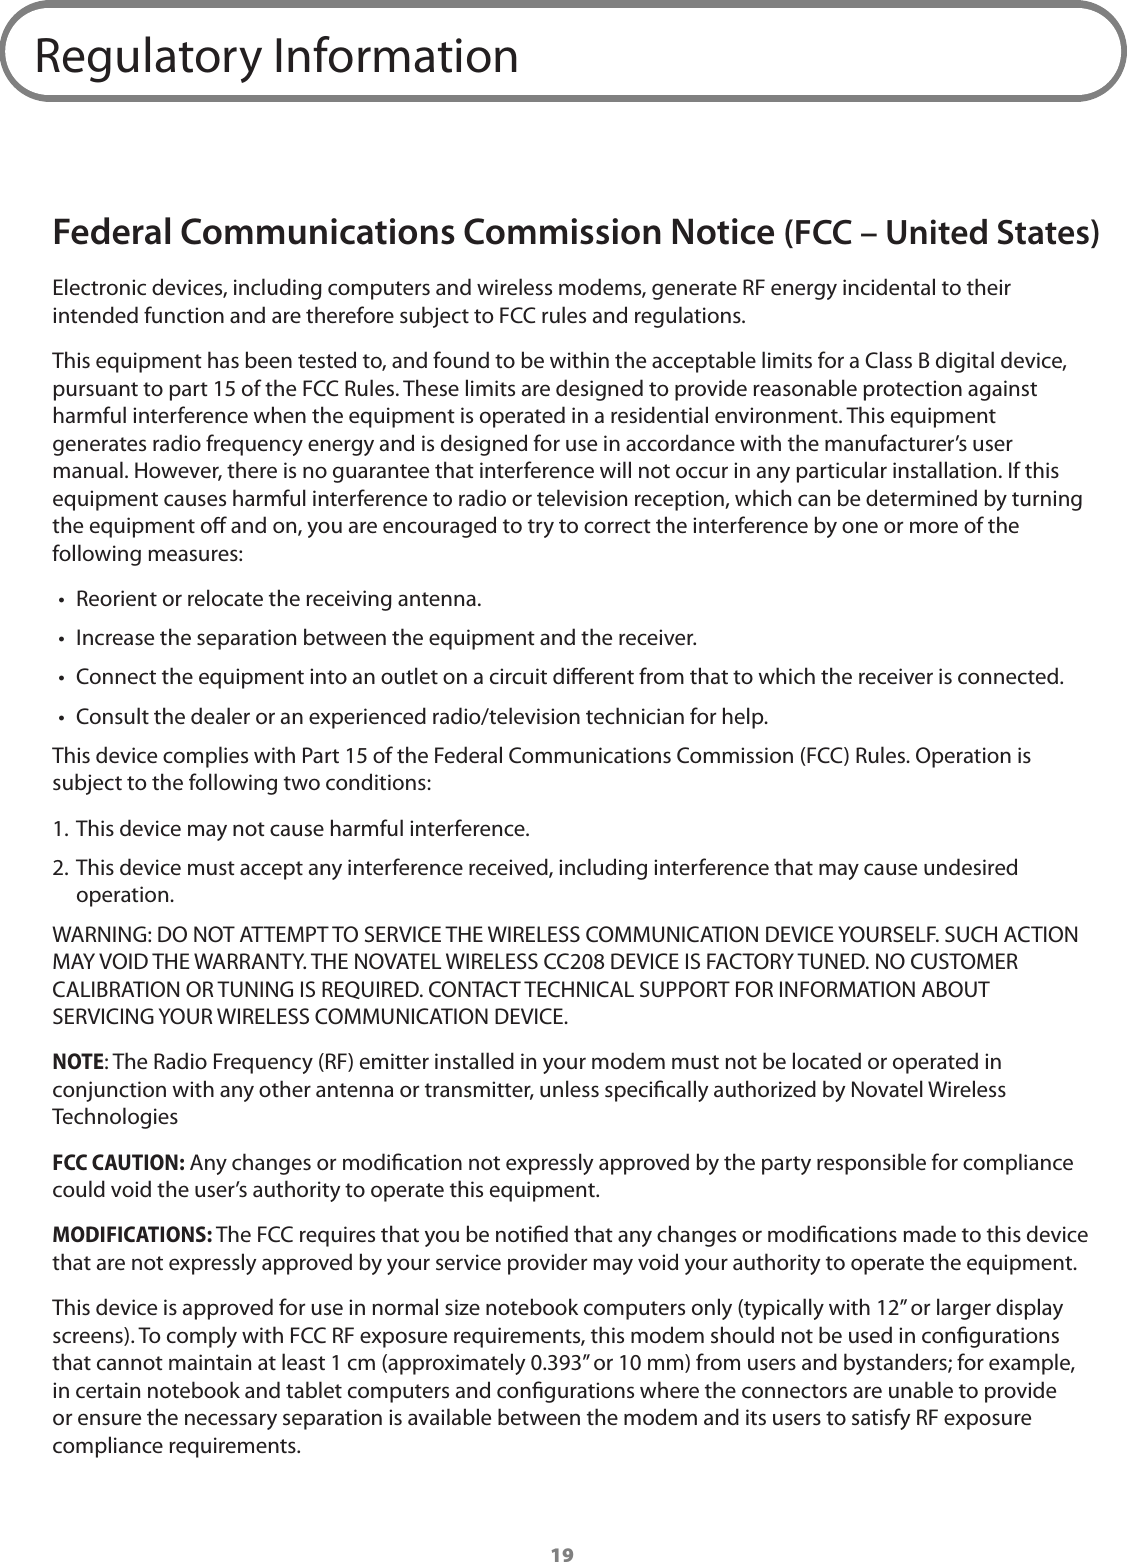 19Regulatory InformationFederal Communications Commission Notice (FCC – United States)Electronic devices, including computers and wireless modems, generate RF energy incidental to their intended function and are therefore subject to FCC rules and regulations.This equipment has been tested to, and found to be within the acceptable limits for a Class B digital device, pursuant to part 15 of the FCC Rules. These limits are designed to provide reasonable protection against harmful interference when the equipment is operated in a residential environment. This equipment generates radio frequency energy and is designed for use in accordance with the manufacturer’s user manual. However, there is no guarantee that interference will not occur in any particular installation. If this equipment causes harmful interference to radio or television reception, which can be determined by turning the equipment o and on, you are encouraged to try to correct the interference by one or more of the following measures:•  Reorient or relocate the receiving antenna.•  Increase the separation between the equipment and the receiver.•  Connect the equipment into an outlet on a circuit dierent from that to which the receiver is connected.•  Consult the dealer or an experienced radio/television technician for help.This device complies with Part 15 of the Federal Communications Commission (FCC) Rules. Operation is subject to the following two conditions:1. This device may not cause harmful interference.2. This device must accept any interference received, including interference that may cause undesired operation.WARNING: DO NOT ATTEMPT TO SERVICE THE WIRELESS COMMUNICATION DEVICE YOURSELF. SUCH ACTION MAY VOID THE WARRANTY. THE NOVATEL WIRELESS CC208 DEVICE IS FACTORY TUNED. NO CUSTOMER CALIBRATION OR TUNING IS REQUIRED. CONTACT TECHNICAL SUPPORT FOR INFORMATION ABOUT SERVICING YOUR WIRELESS COMMUNICATION DEVICE.NOTE: The Radio Frequency (RF) emitter installed in your modem must not be located or operated in conjunction with any other antenna or transmitter, unless specically authorized by Novatel Wireless TechnologiesFCC CAUTION: Any changes or modication not expressly approved by the party responsible for compliance could void the user’s authority to operate this equipment.MODIFICATIONS: The FCC requires that you be notied that any changes or modications made to this device that are not expressly approved by your service provider may void your authority to operate the equipment.This device is approved for use in normal size notebook computers only (typically with 12” or larger display screens). To comply with FCC RF exposure requirements, this modem should not be used in congurations that cannot maintain at least 1 cm (approximately 0.393” or 10 mm) from users and bystanders; for example, in certain notebook and tablet computers and congurations where the connectors are unable to provide or ensure the necessary separation is available between the modem and its users to satisfy RF exposure compliance requirements. 